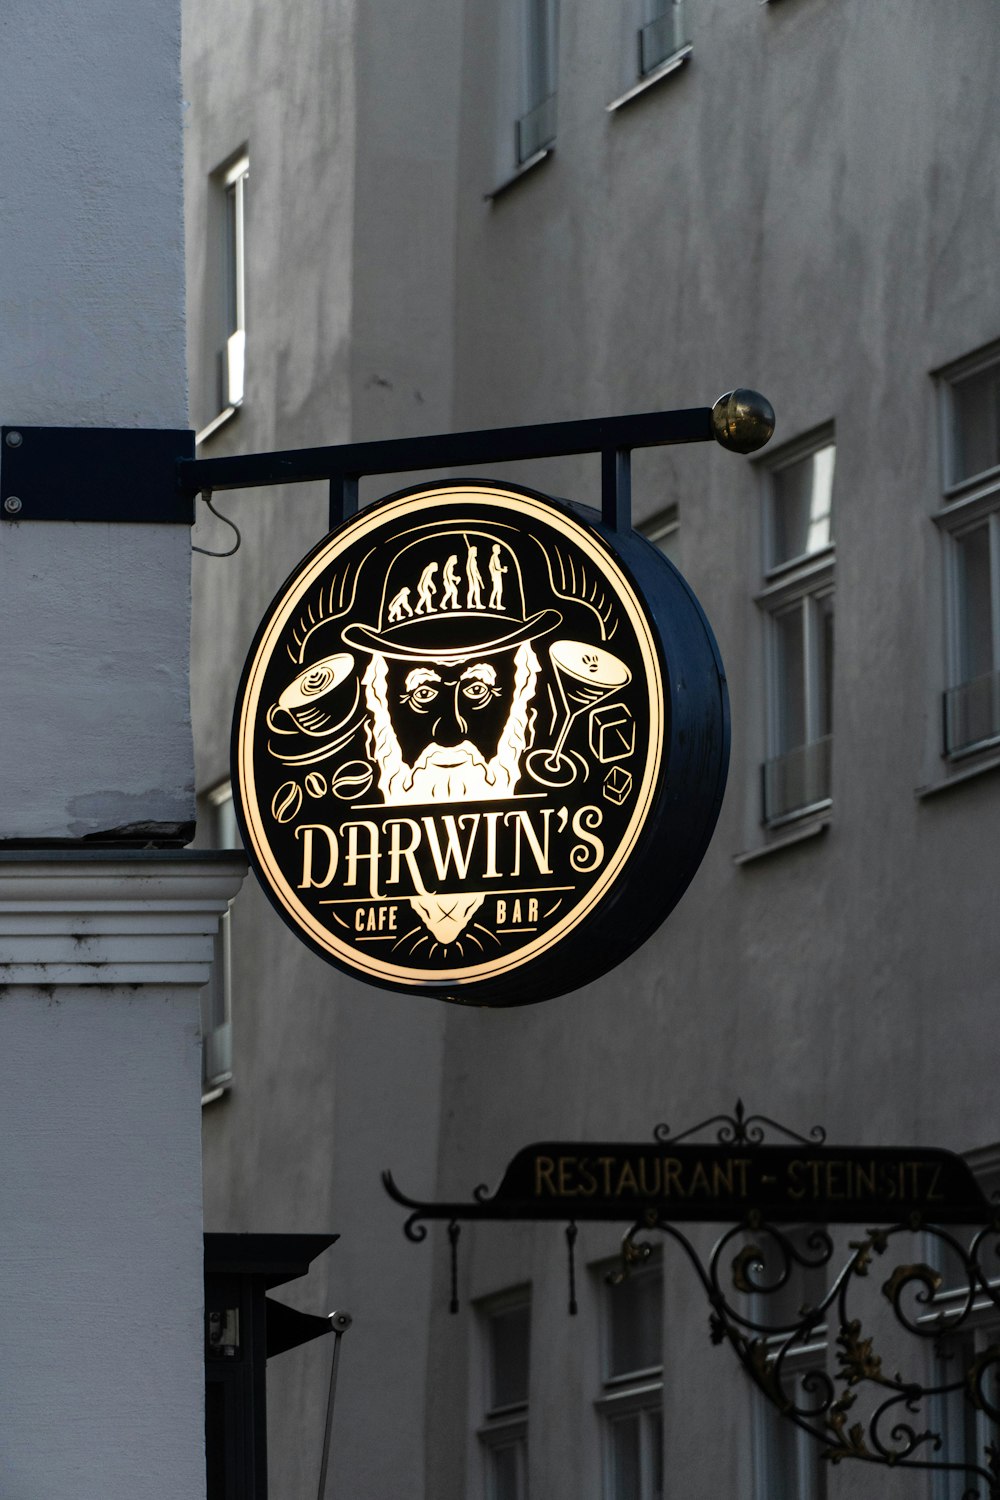 Darwin's building sign during daytime